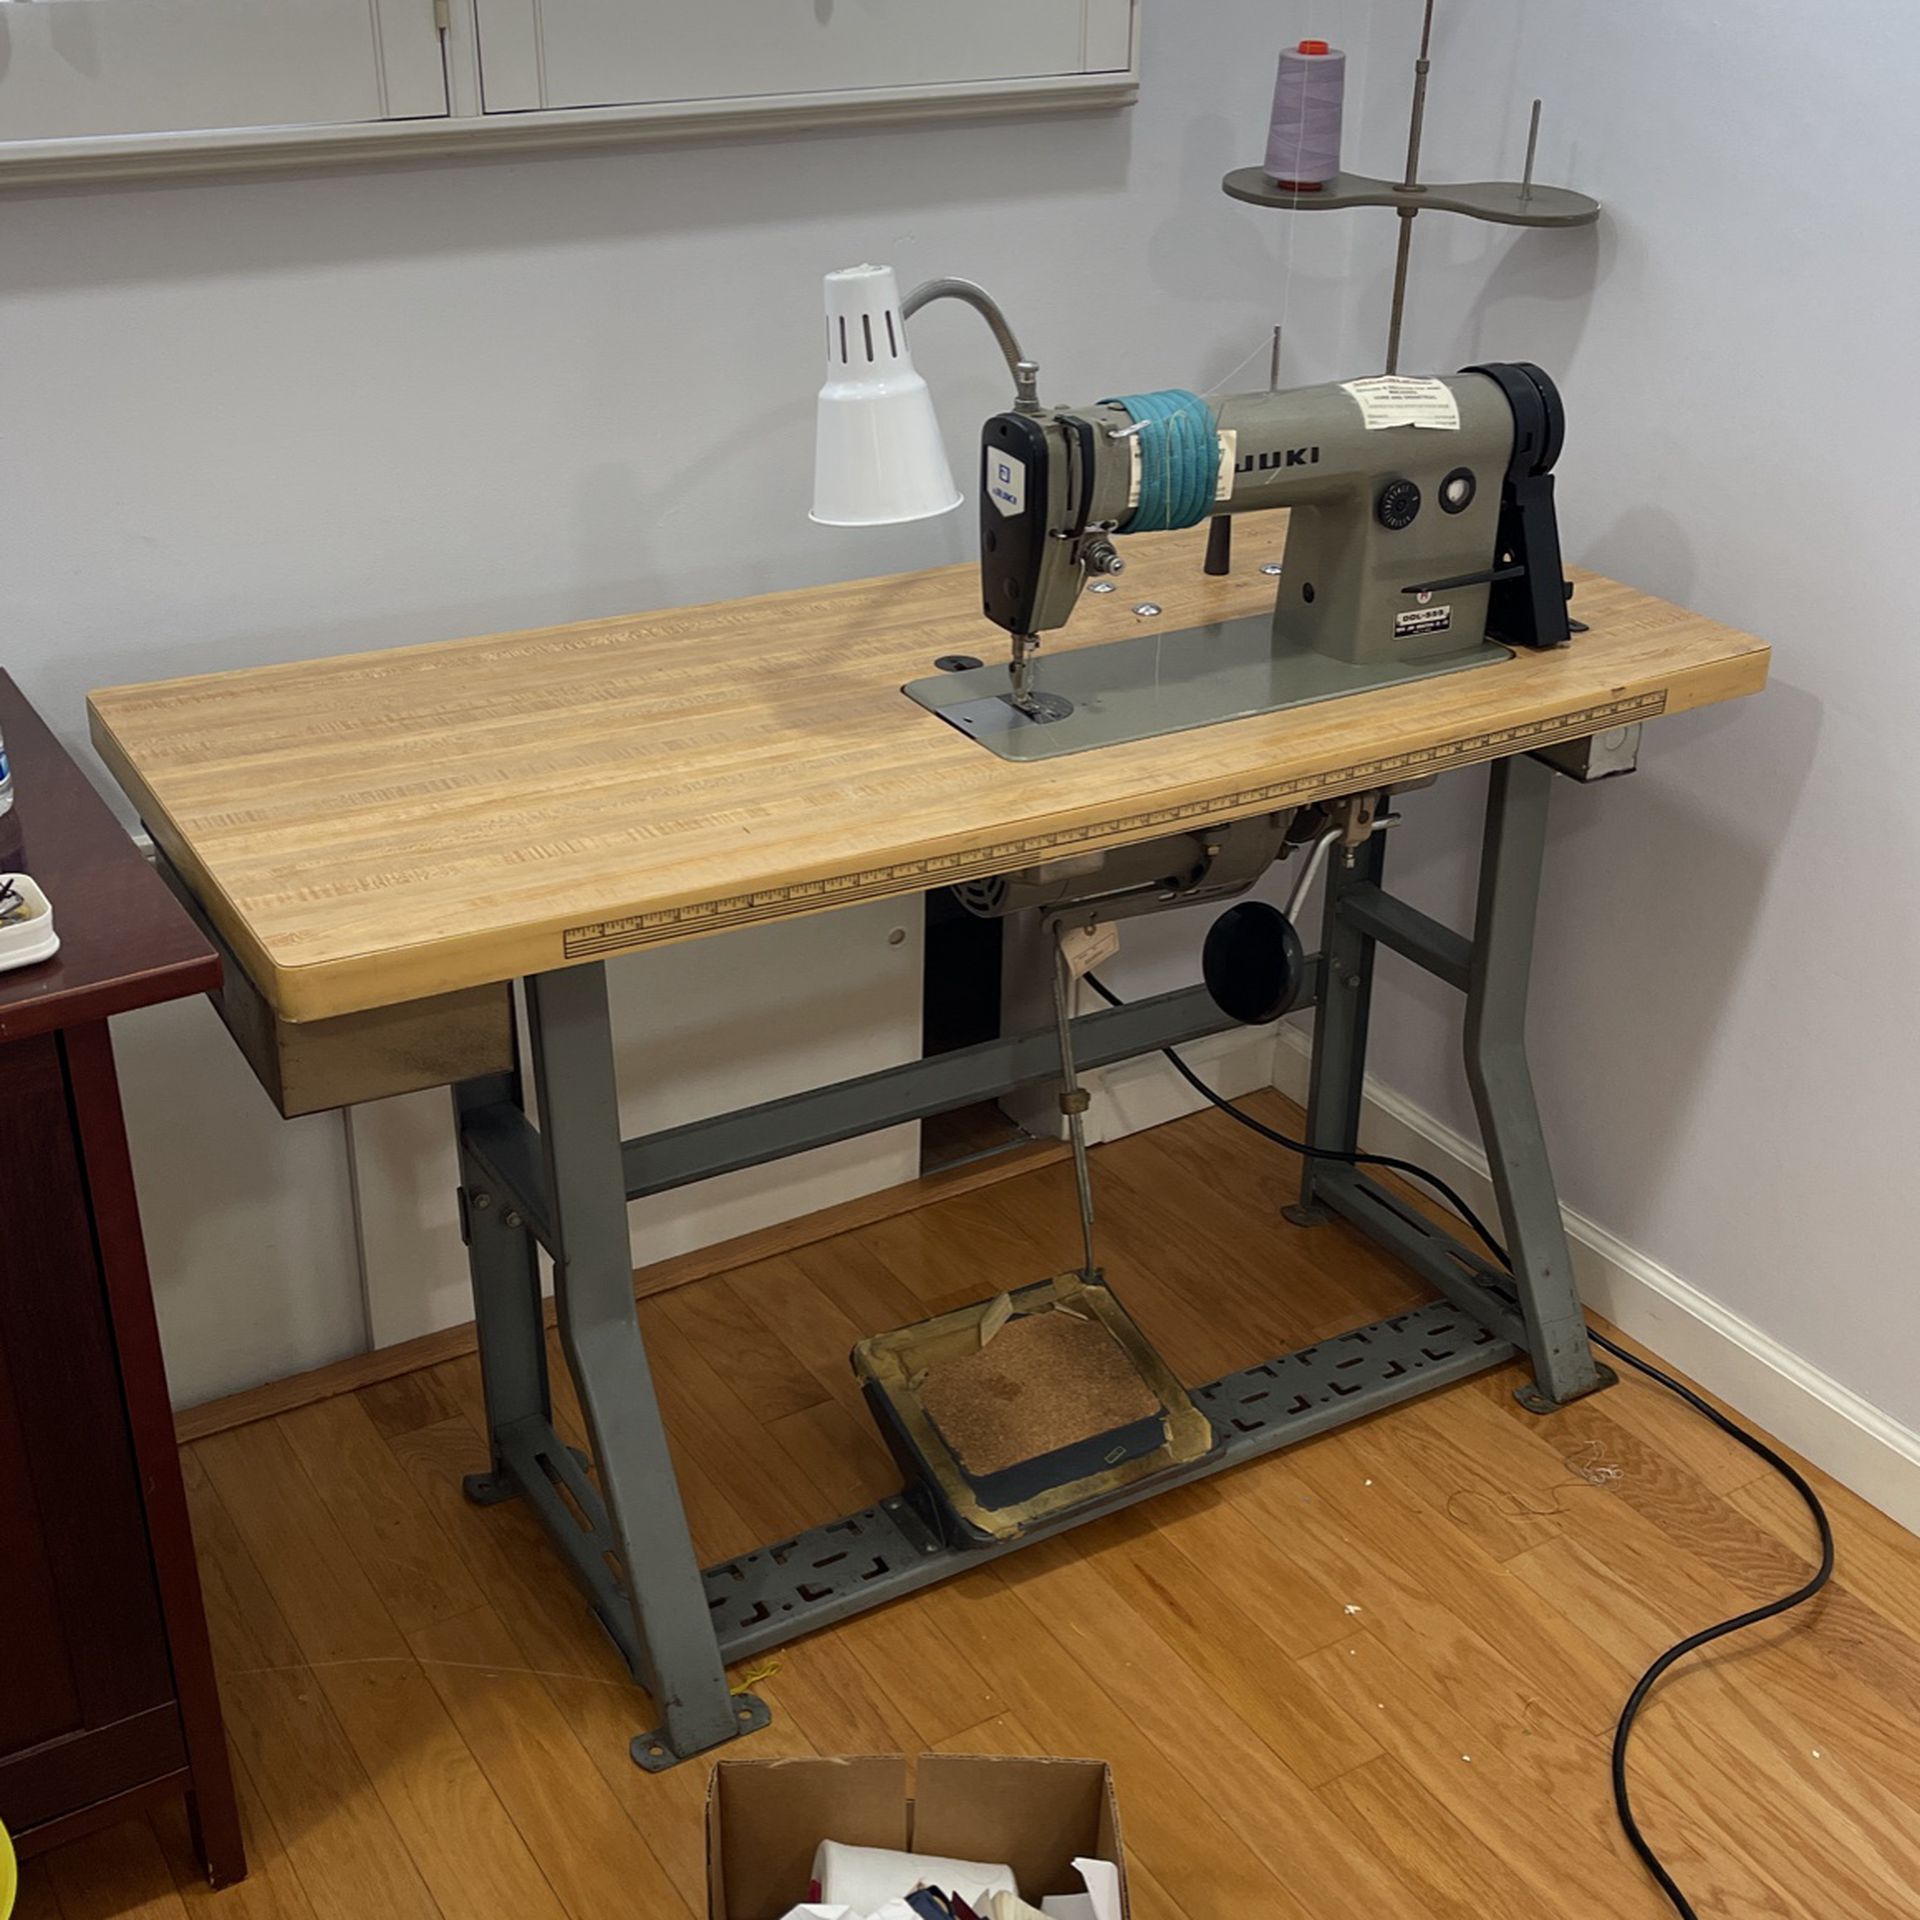 Sewing machine and table